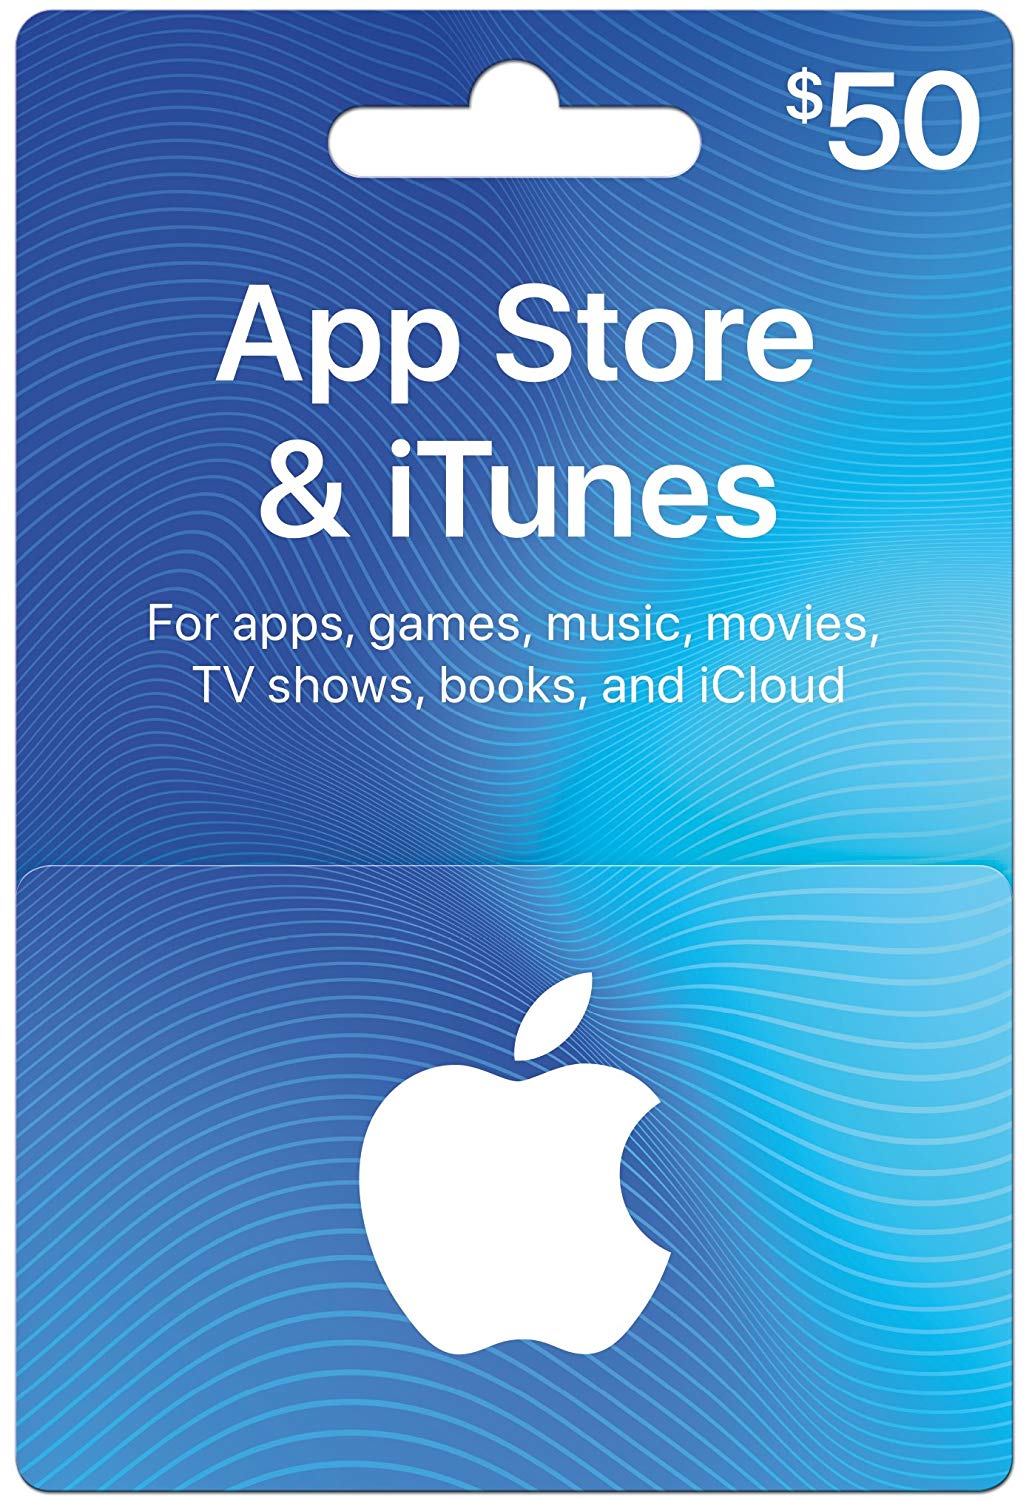 Get a $50 &#039;App Store &amp; iTunes&#039; Gift Card for $42.50 [Deal]